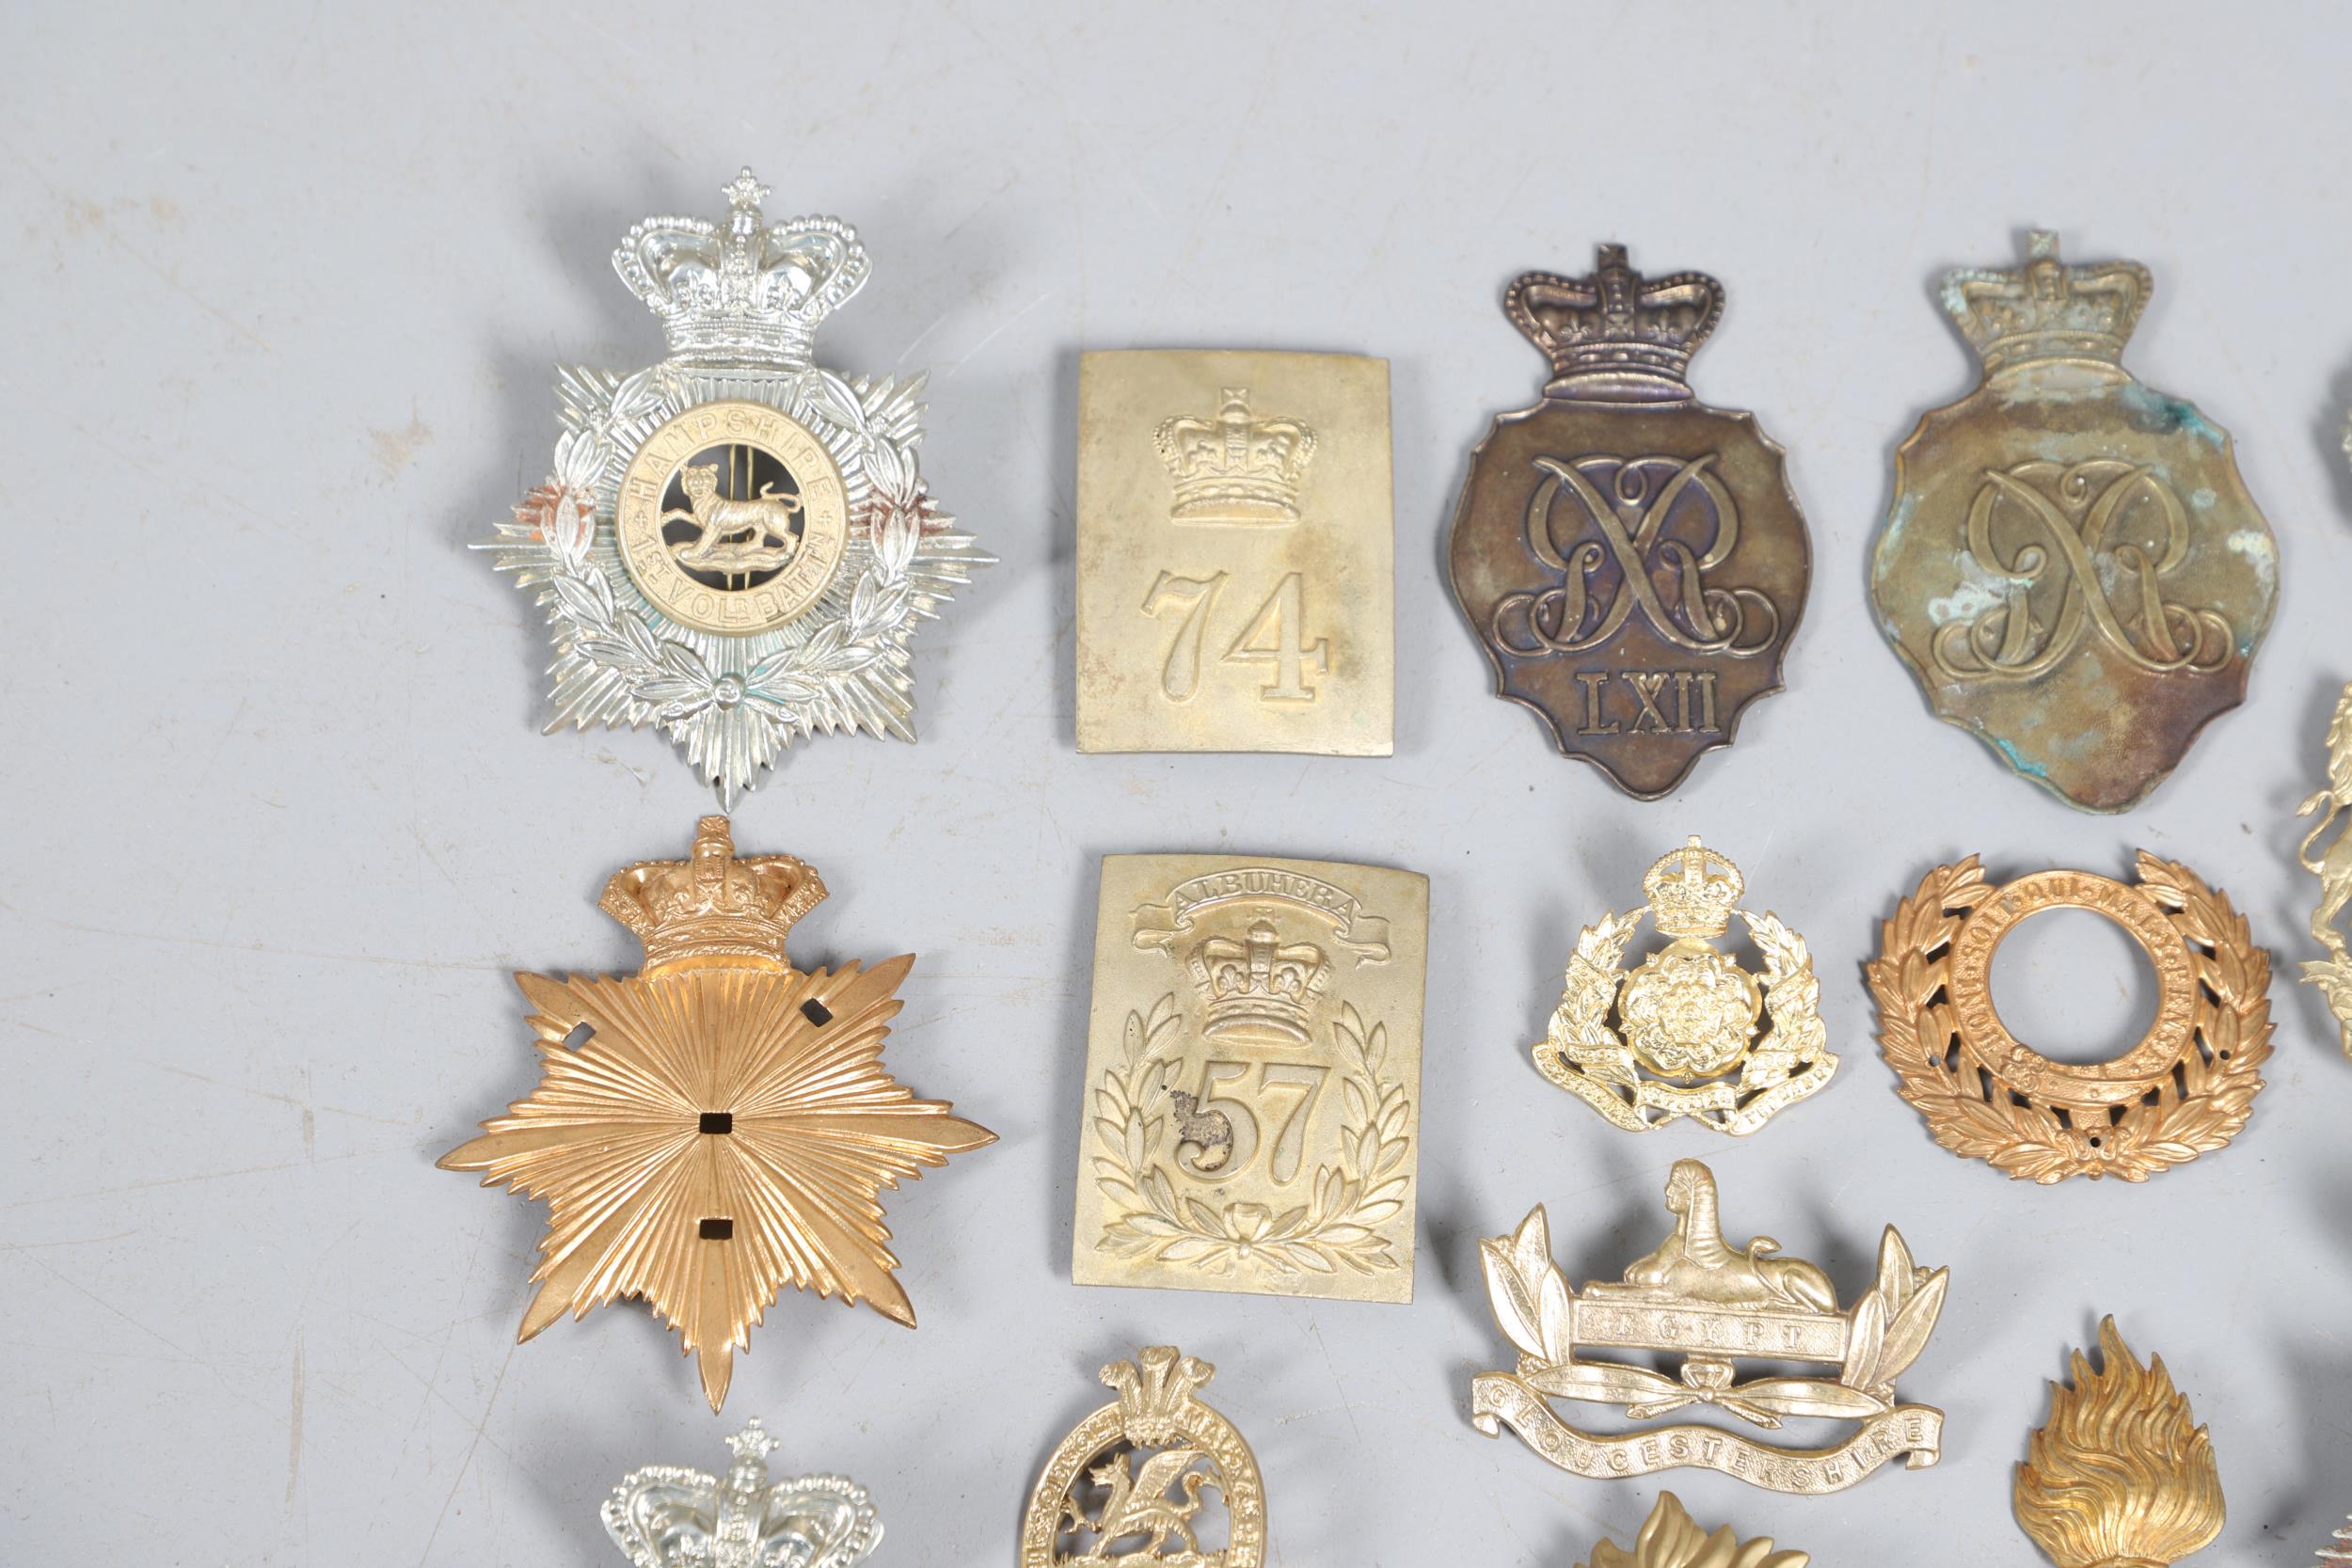 A COLLECTION OF VICTORIAN STYLE HELMET PLATES AND OTHER BADGES. - Image 3 of 10